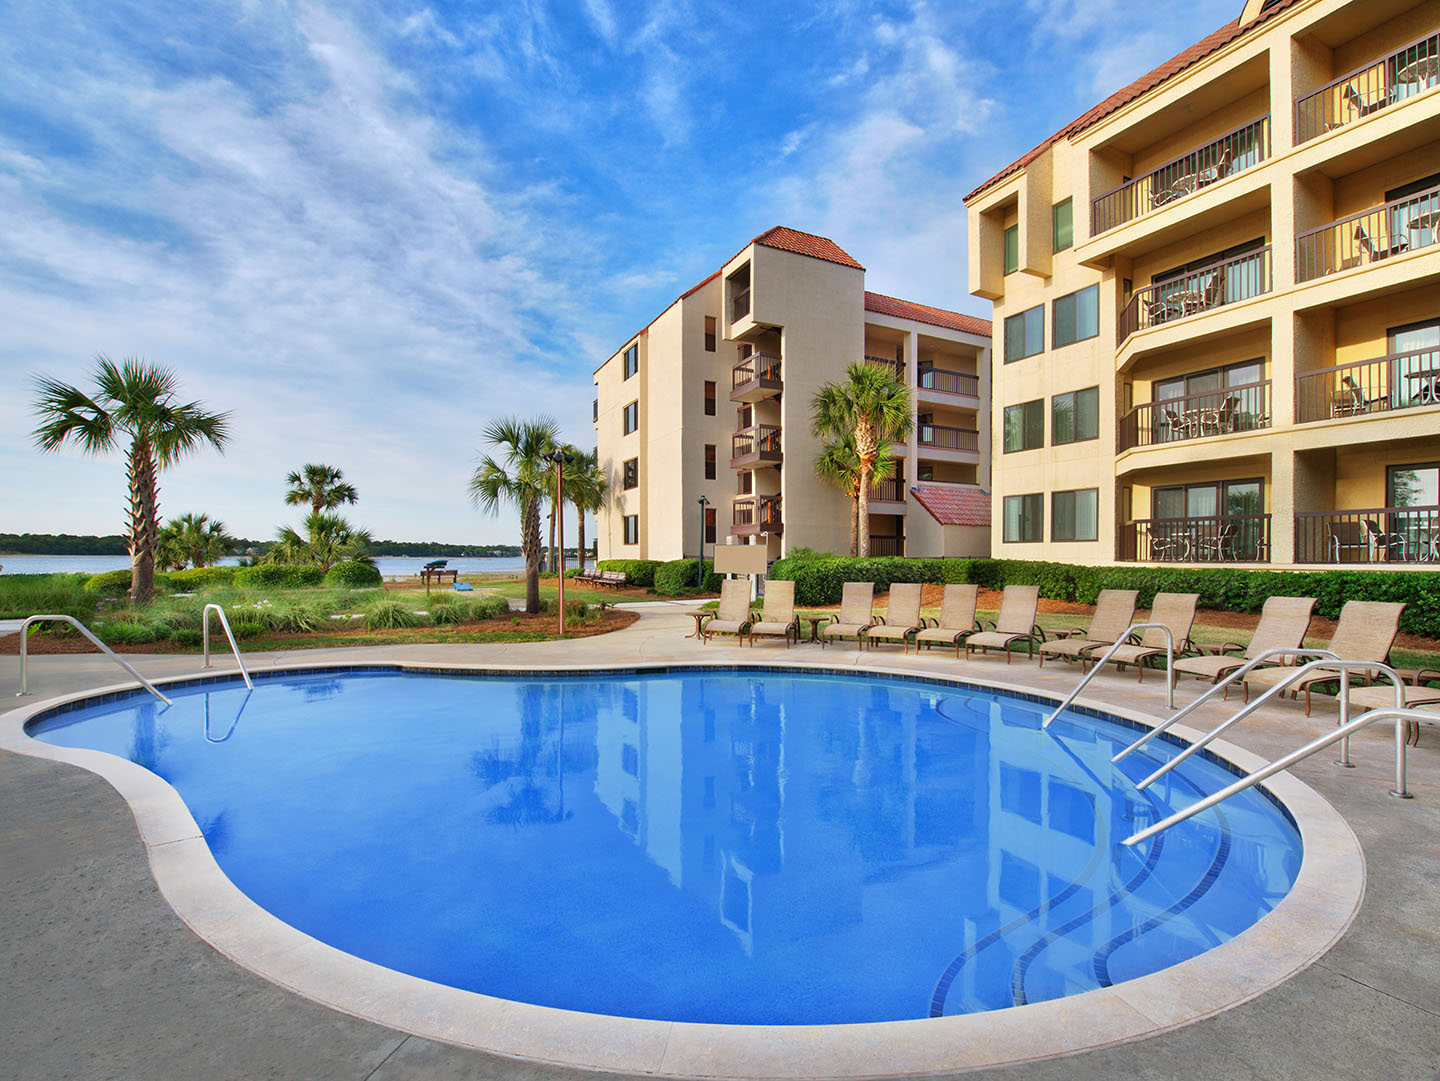 Marriott's Harbour Point Pool. Marriott's Harbour Point is located in Hilton Head Island, South Carolina United States.